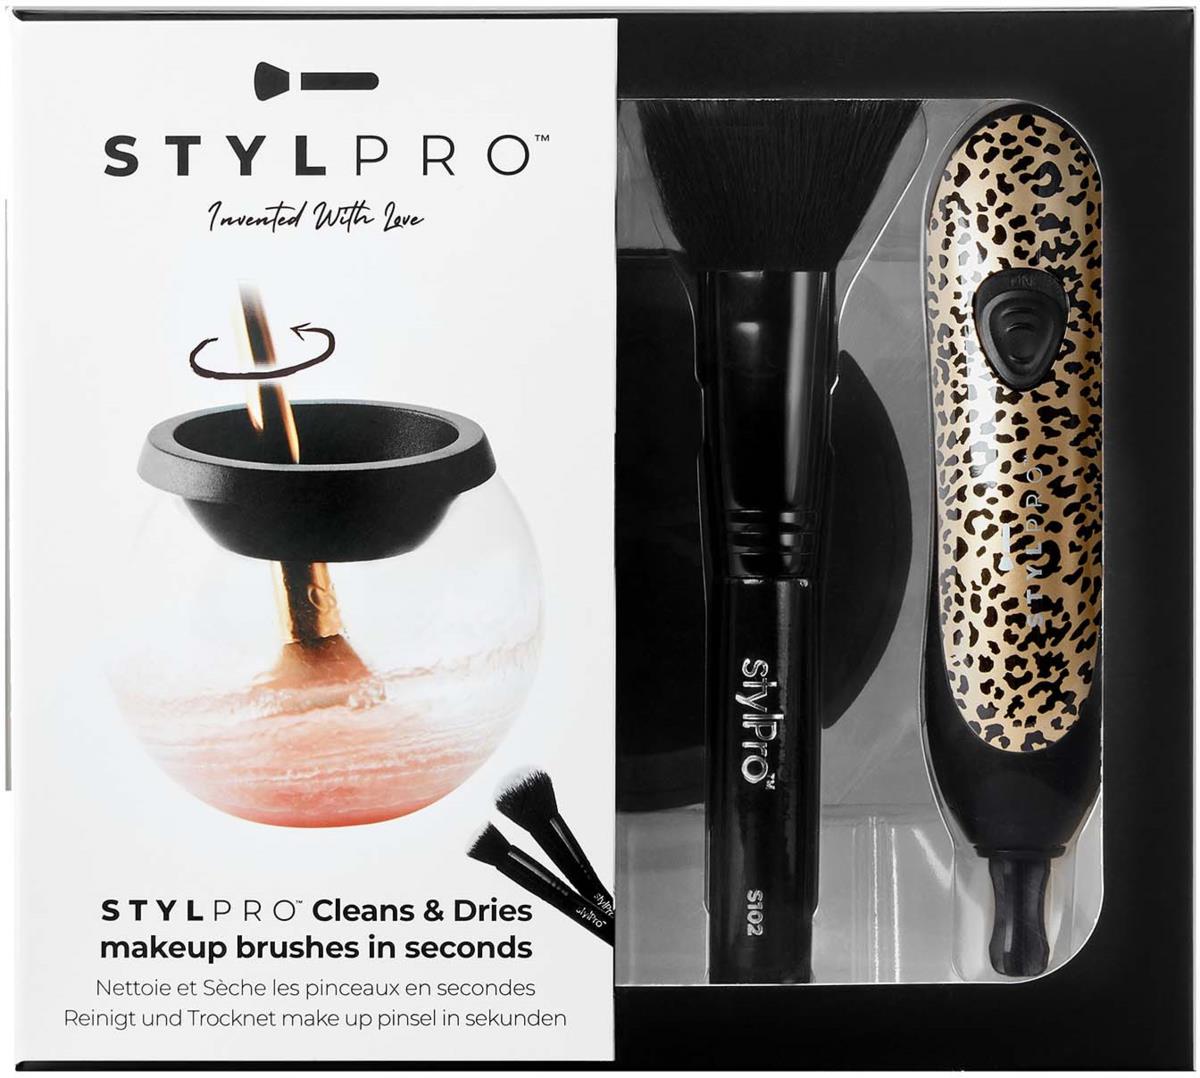 https://lyko.com/globalassets/product-images/stylpro-makeup-brush-cleaner-and-dryer-gift-set-cheetah-3556-106-0000_1.jpg?ref=376208F28C&w=1200&h=1078&quality=75